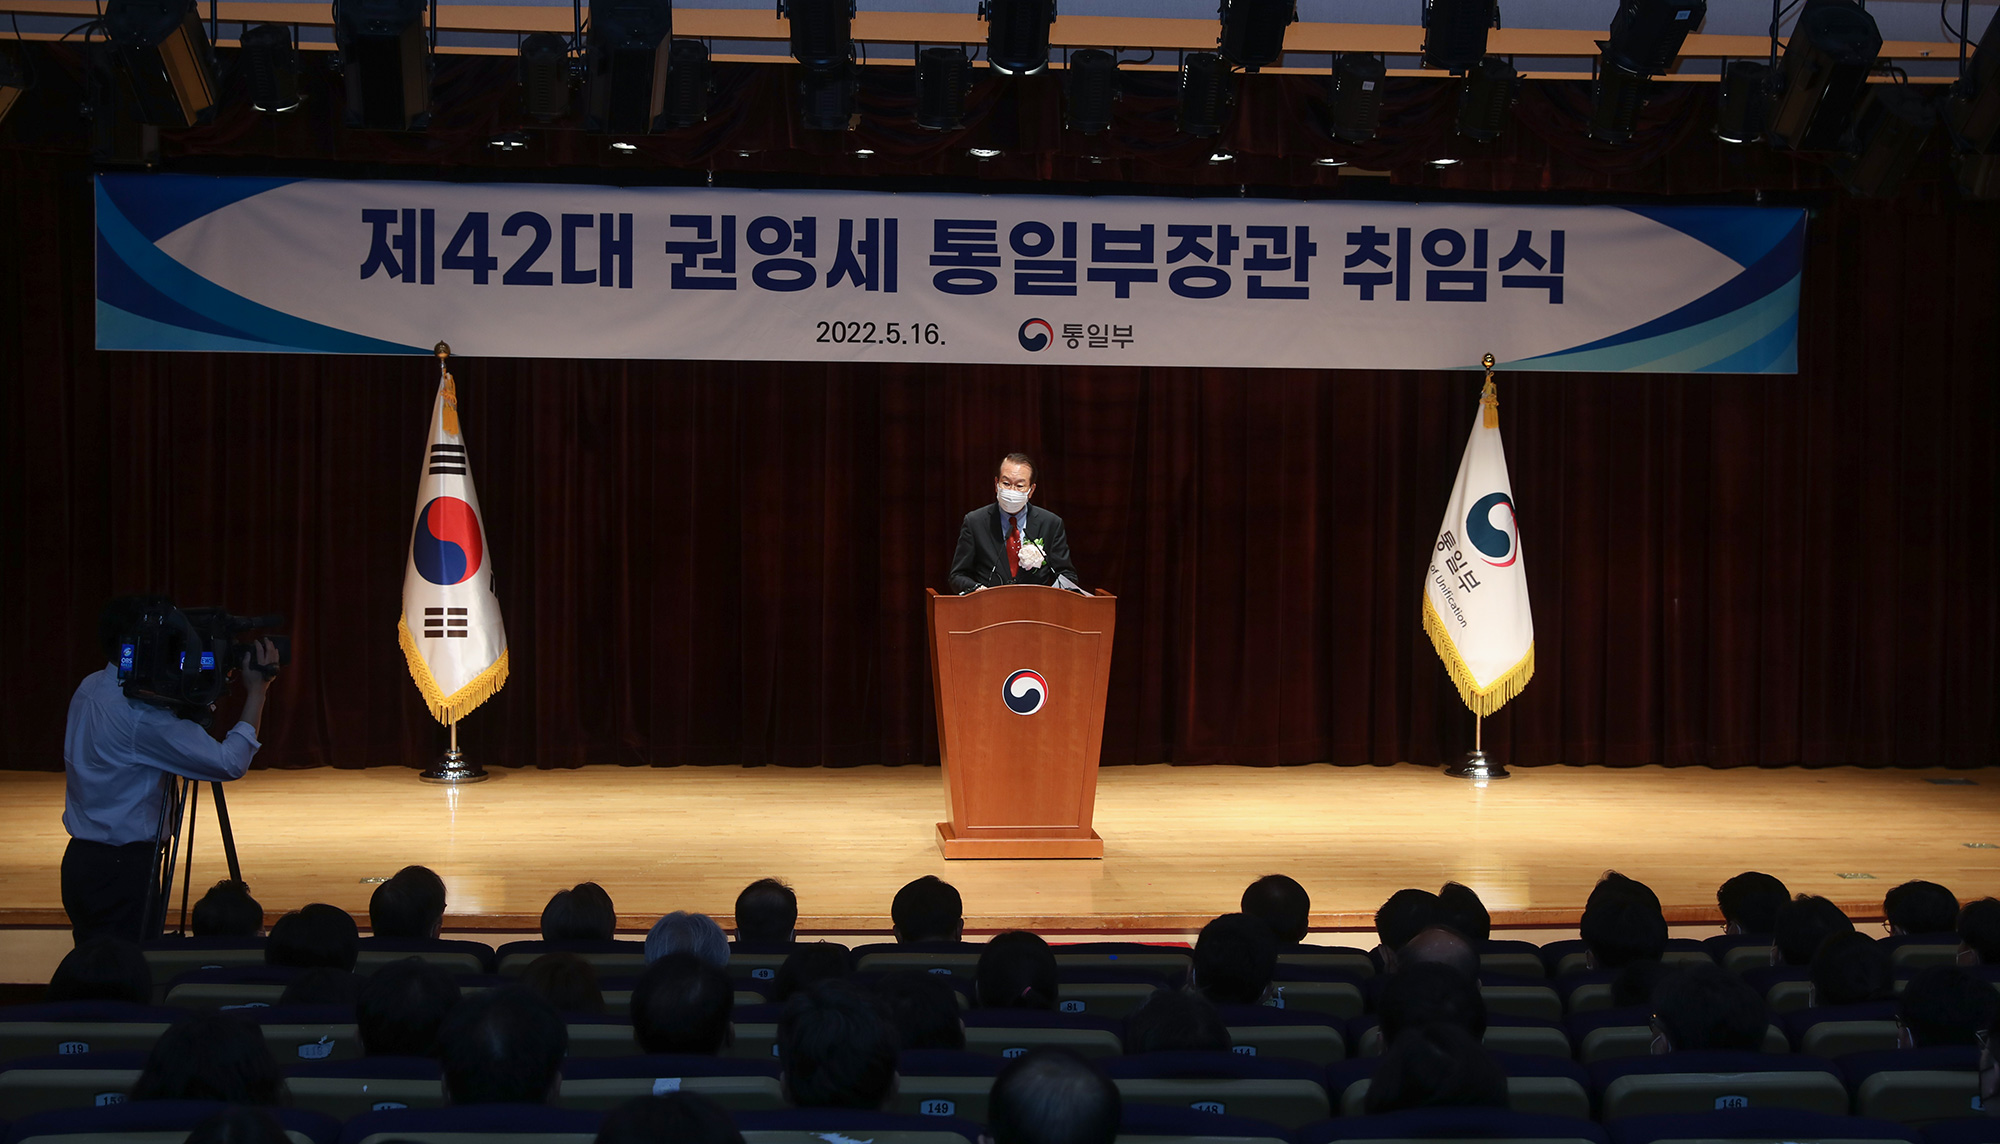 Inauguration Ceremony of the 42nd Minister of Unification, Kwon Youngse